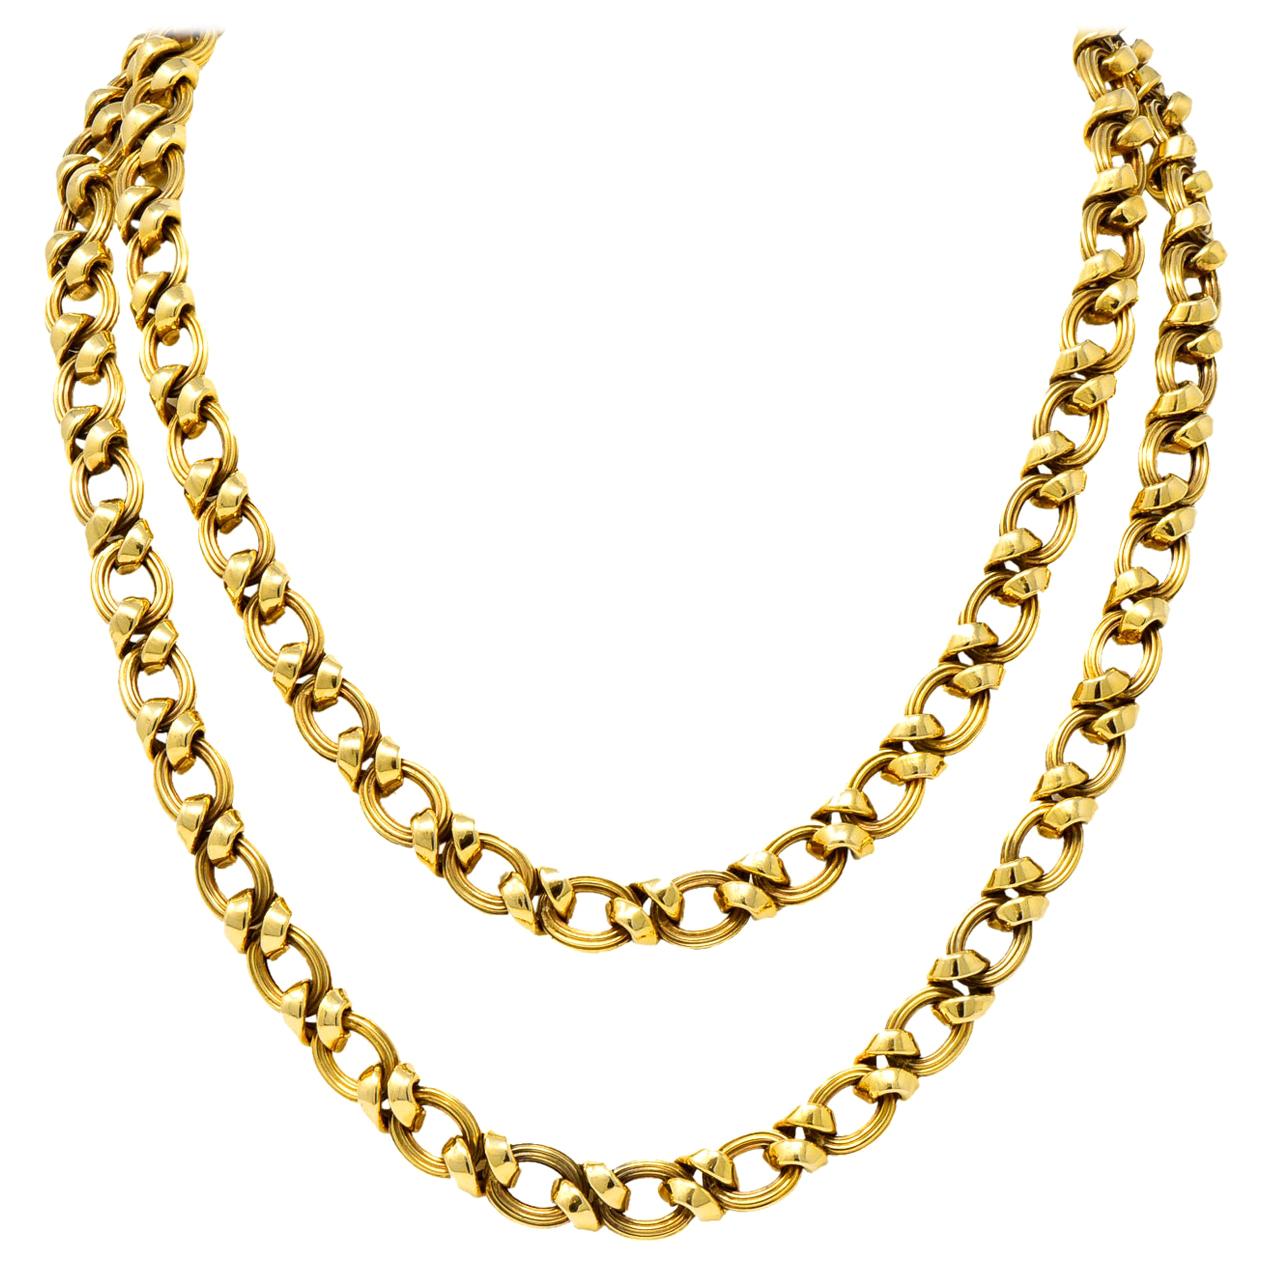 Contemporary 14 Karat Yellow Gold Twisted Link Long Chain Necklace